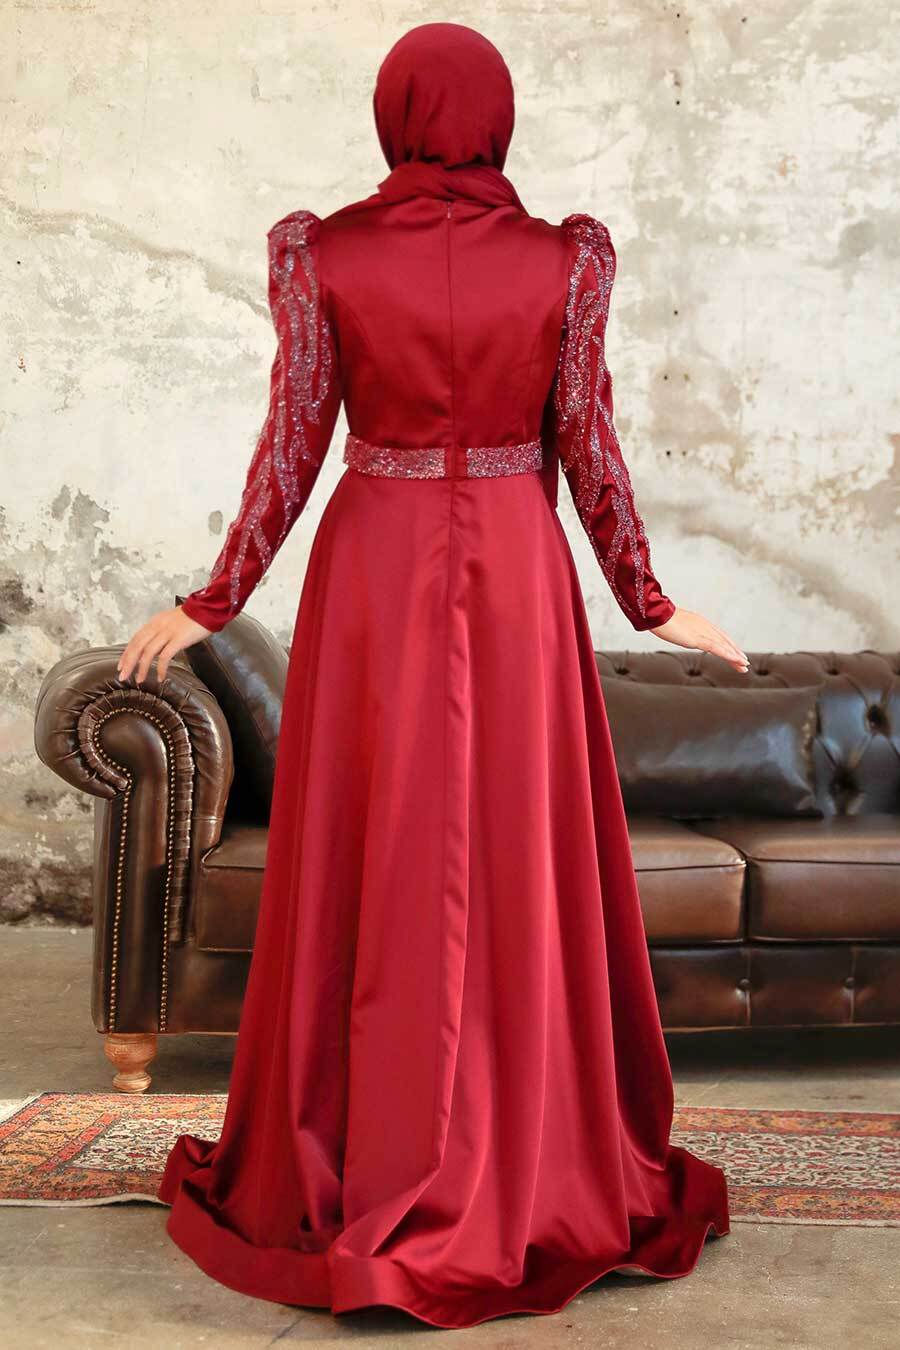 Neva Style - Luxorious Claret Red Modest Evening Dress 22671BR